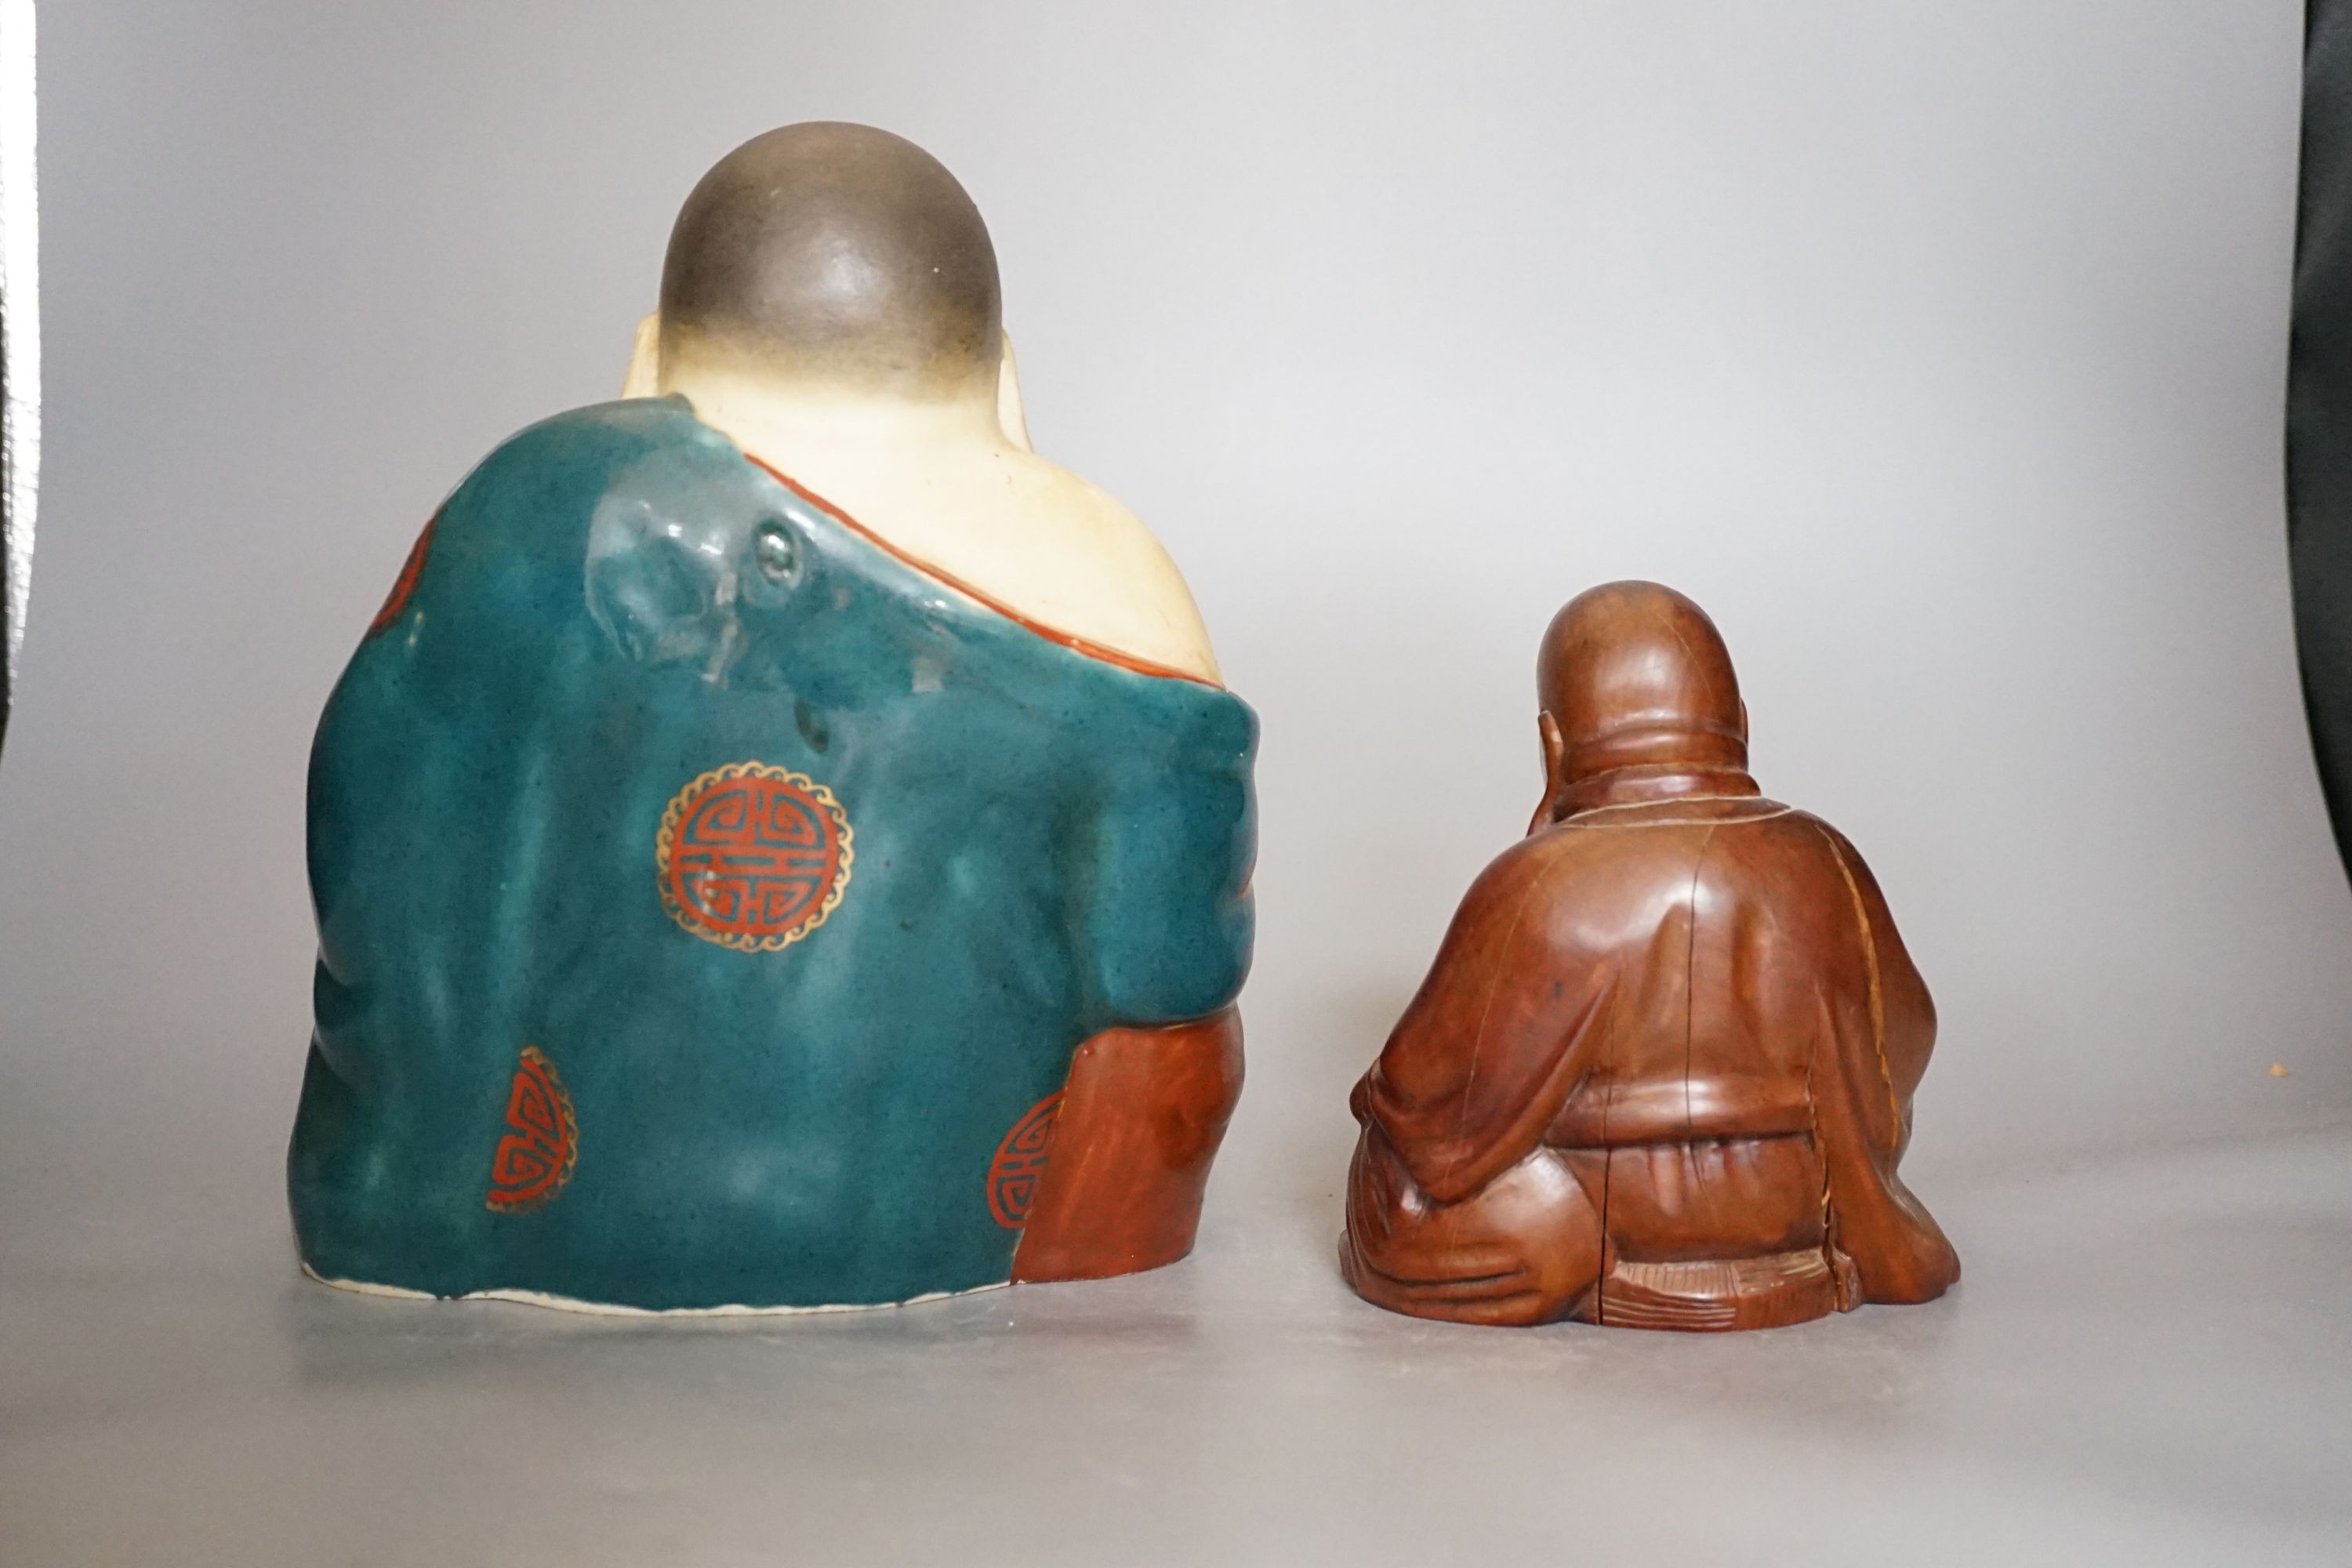 A Chinese enamelled porcelain figure of Budai and a similar carved wood figure (2)